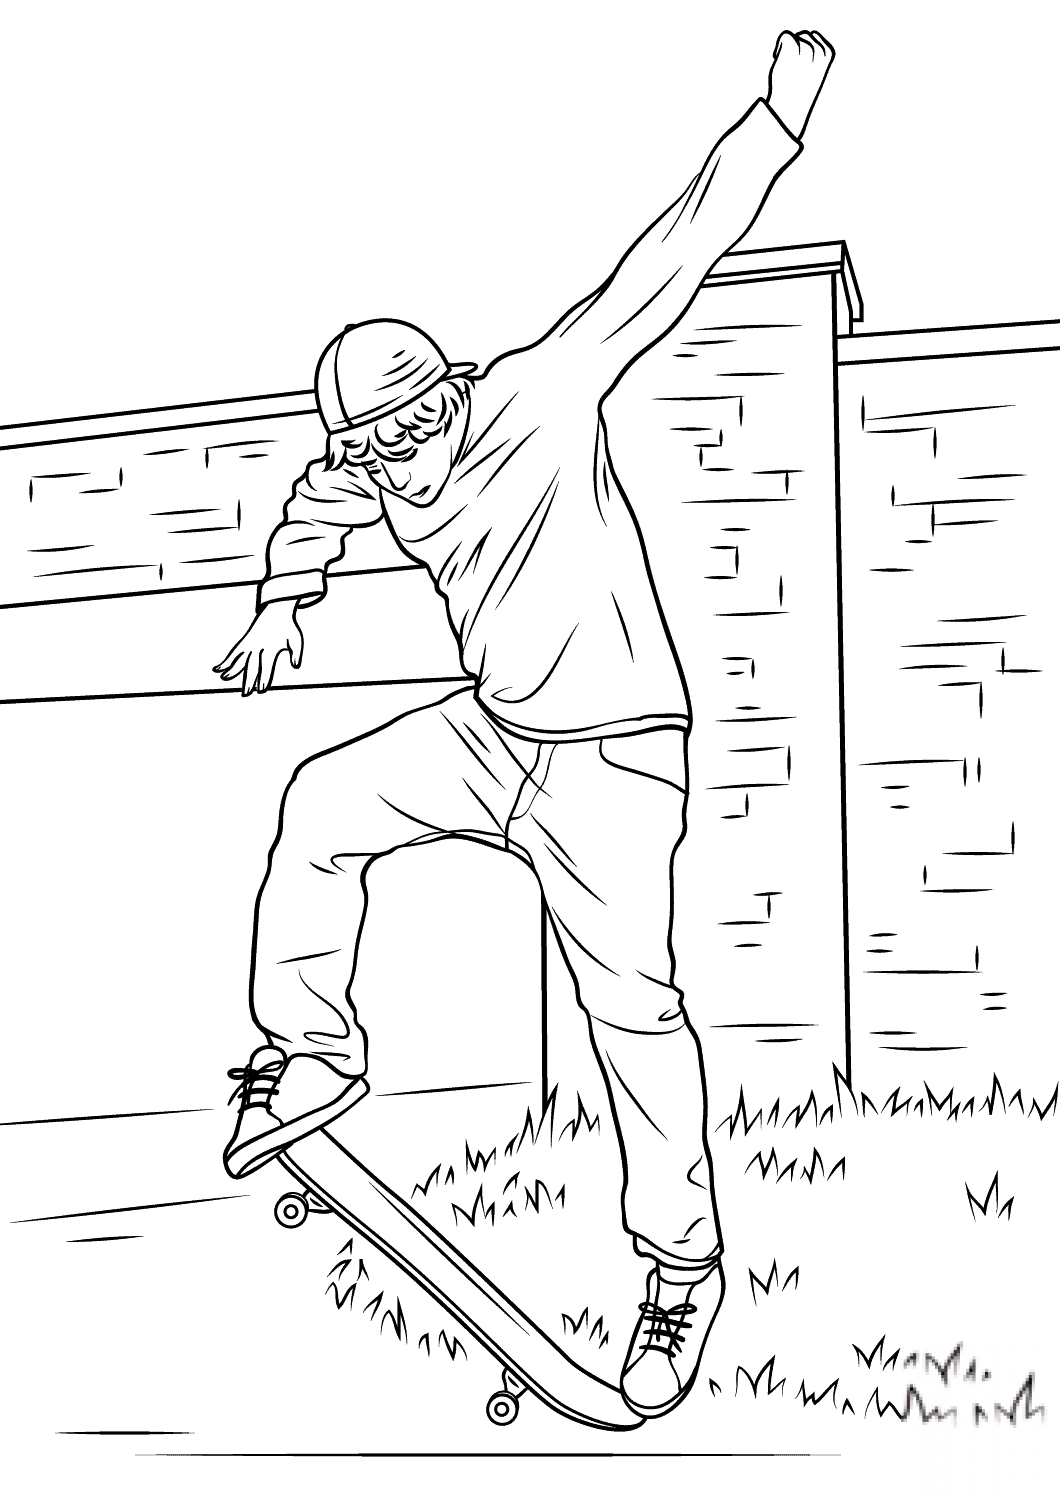 skateboarding coloring pages